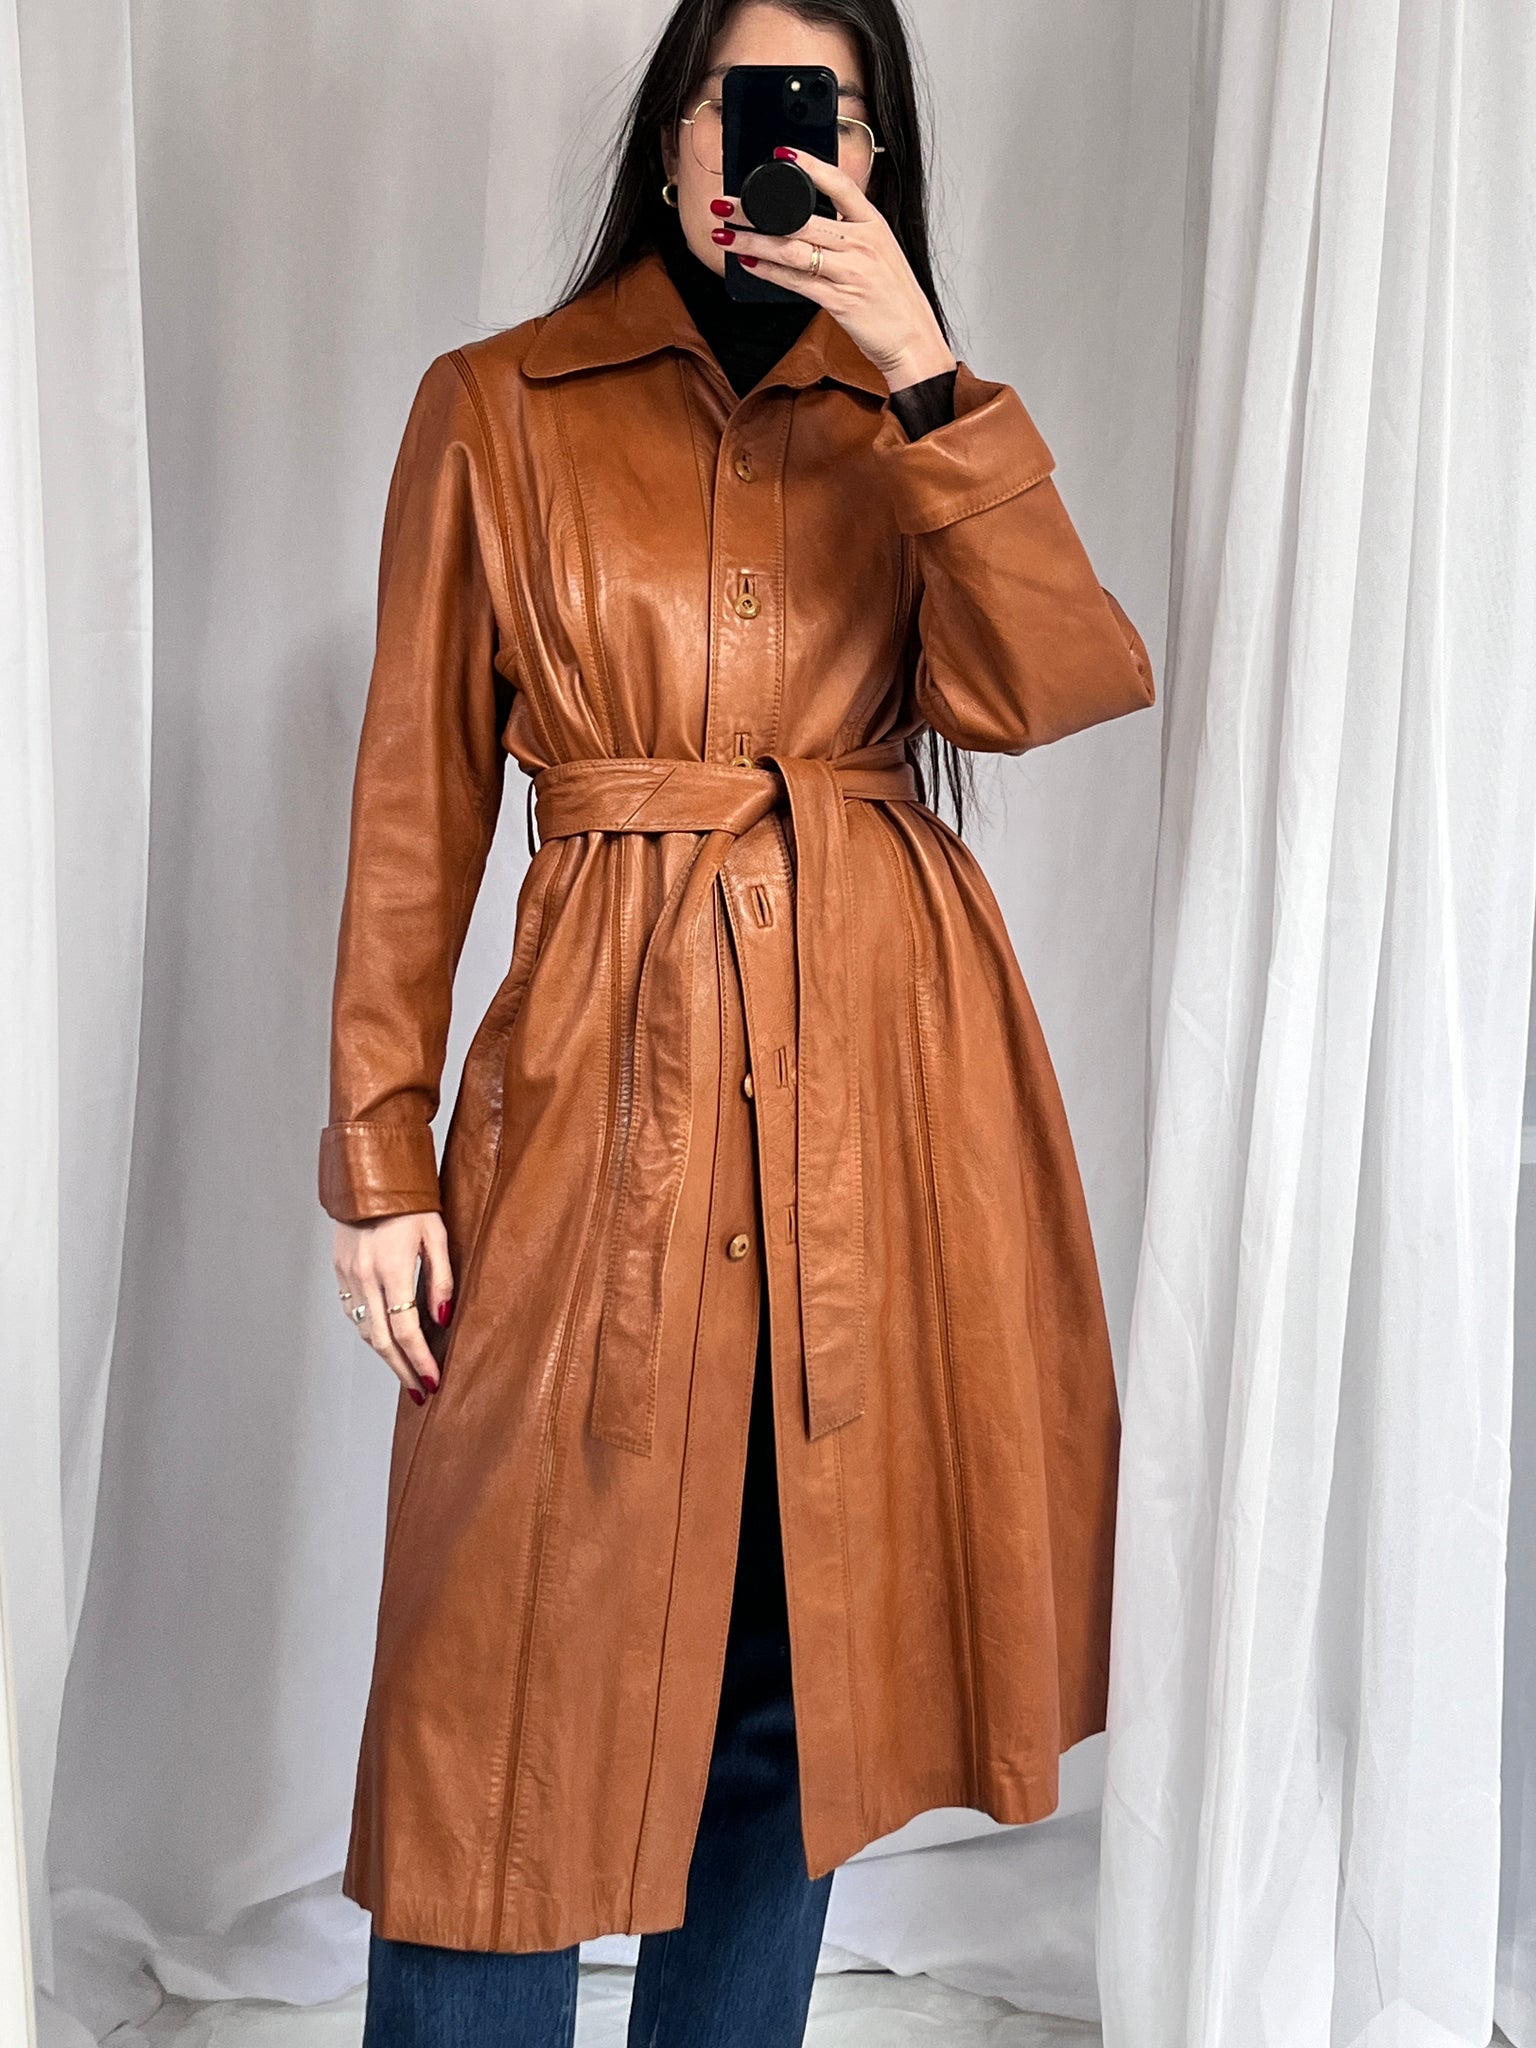 1970s Imperial leather trench with knit seams